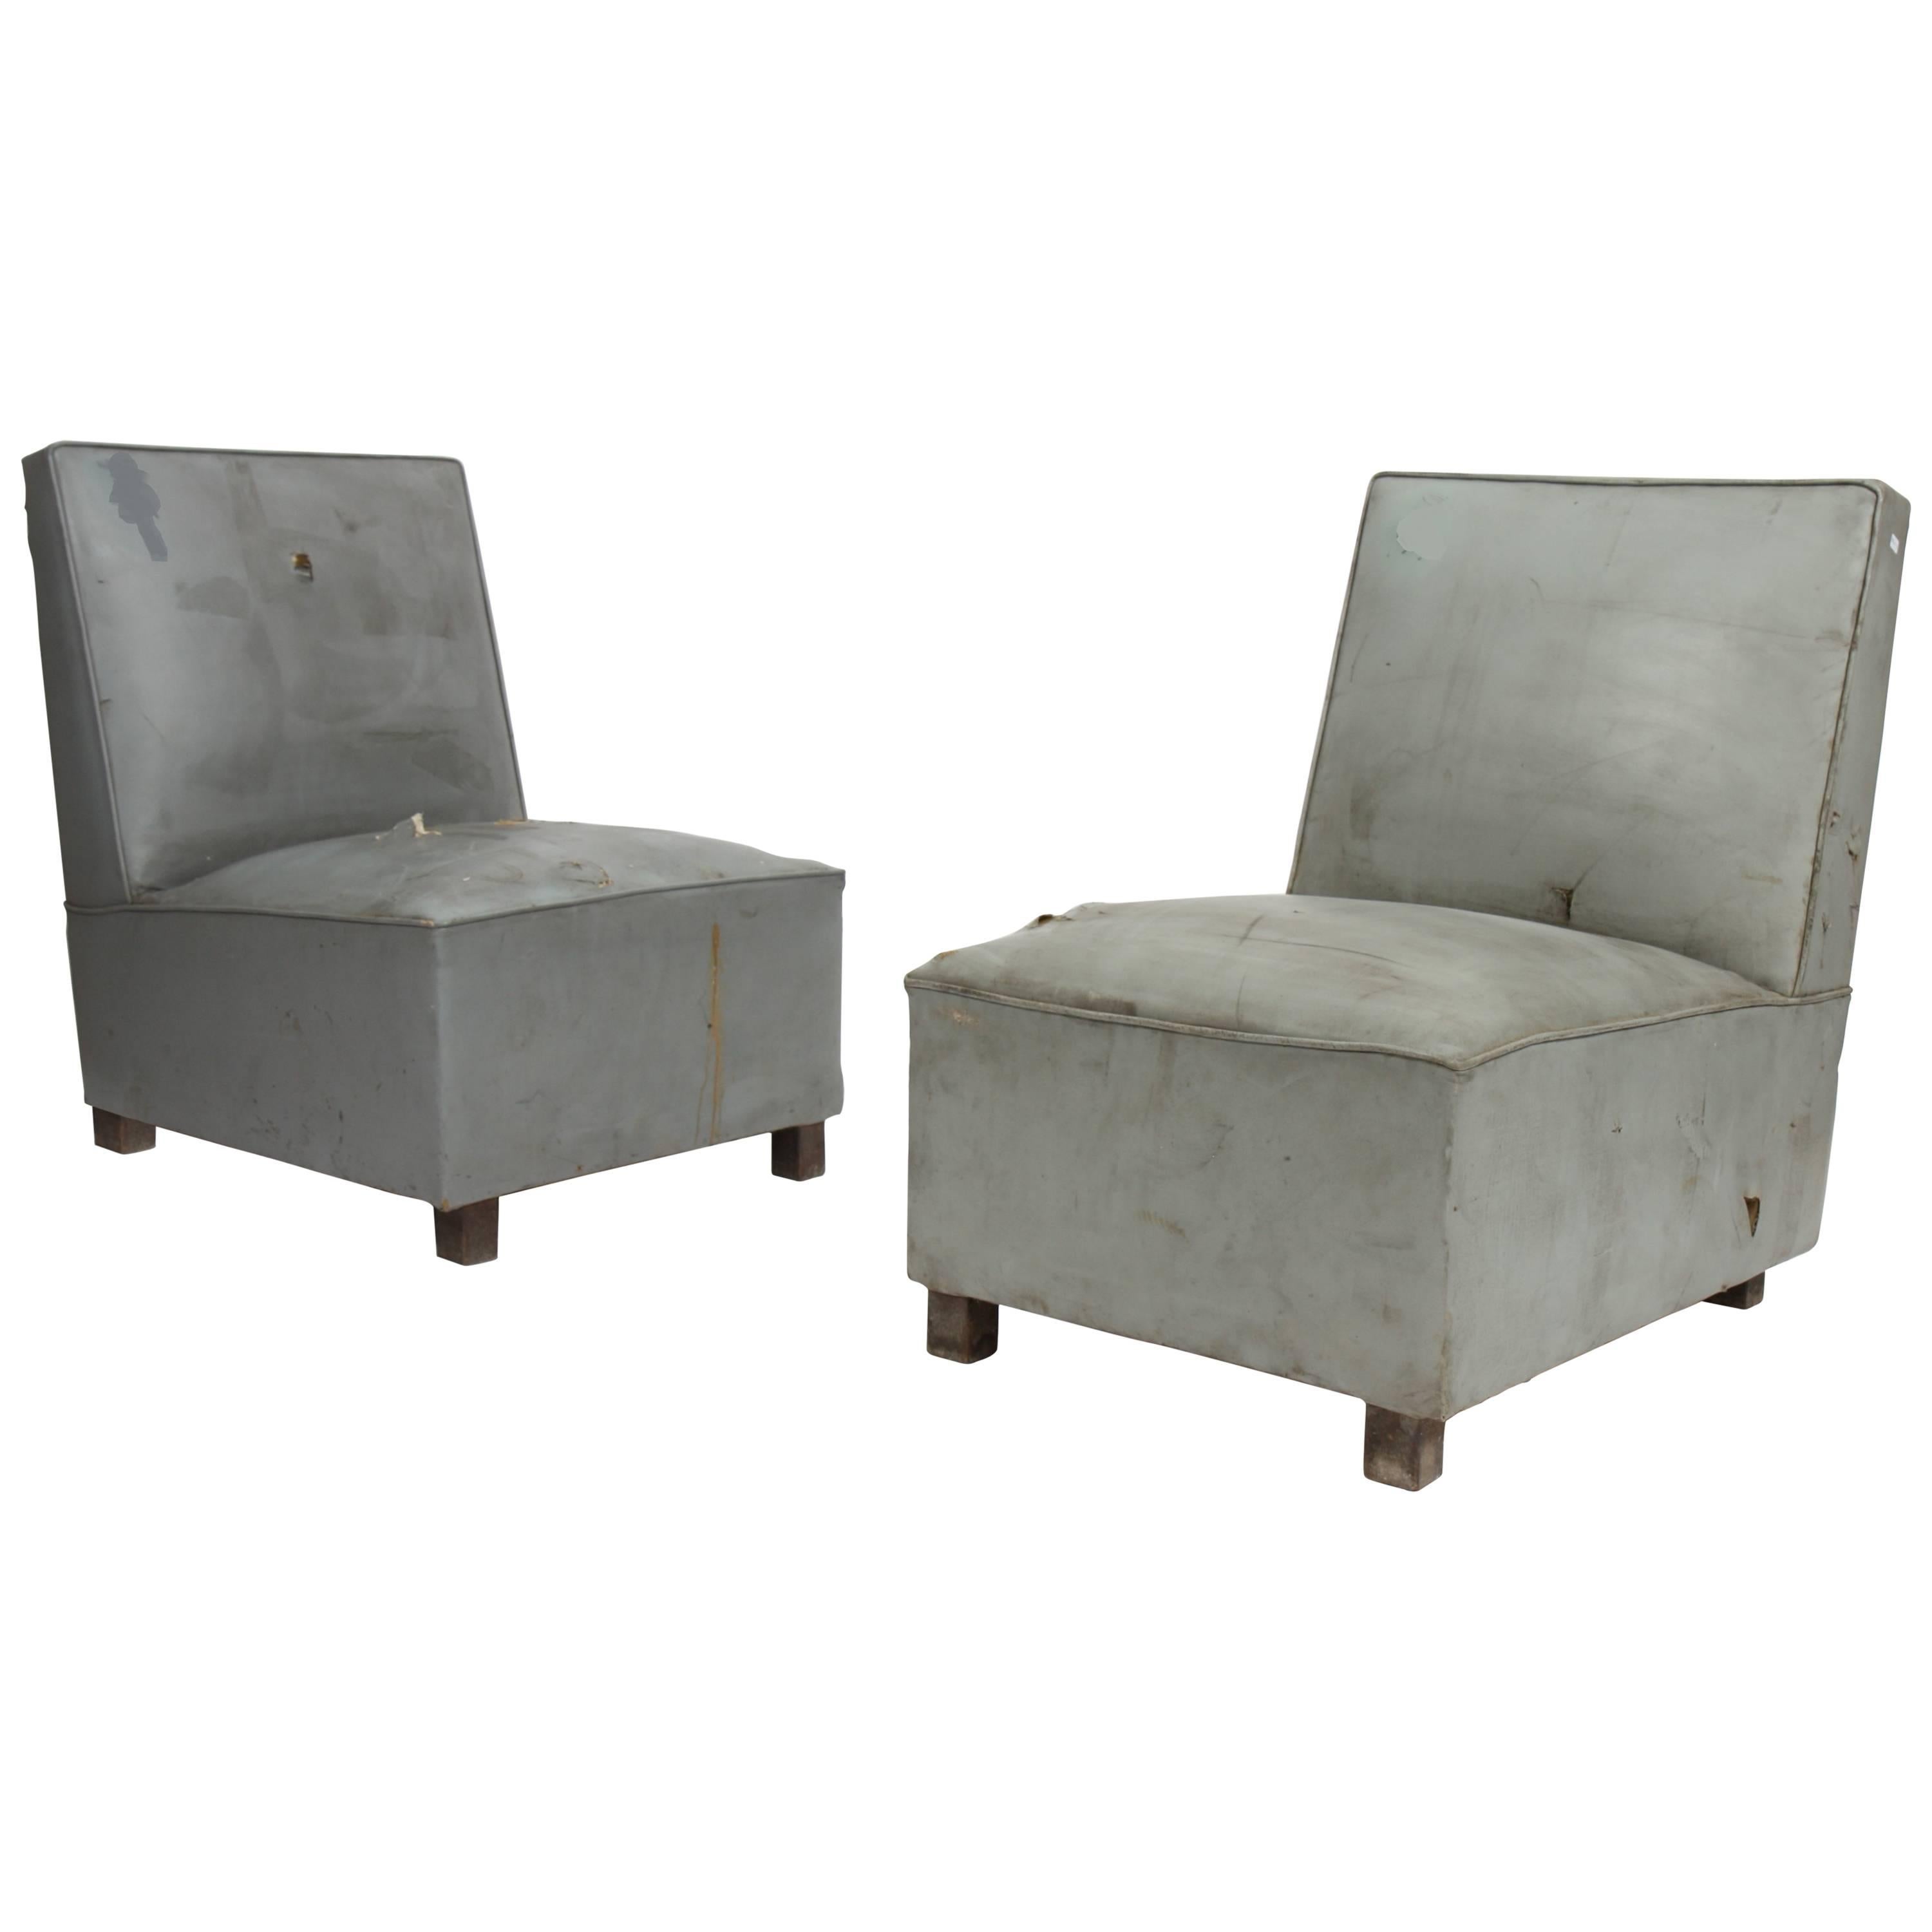 Exceptional Set of Two Lounge Seats by Pierre Jeanneret and Le Corbusier 1